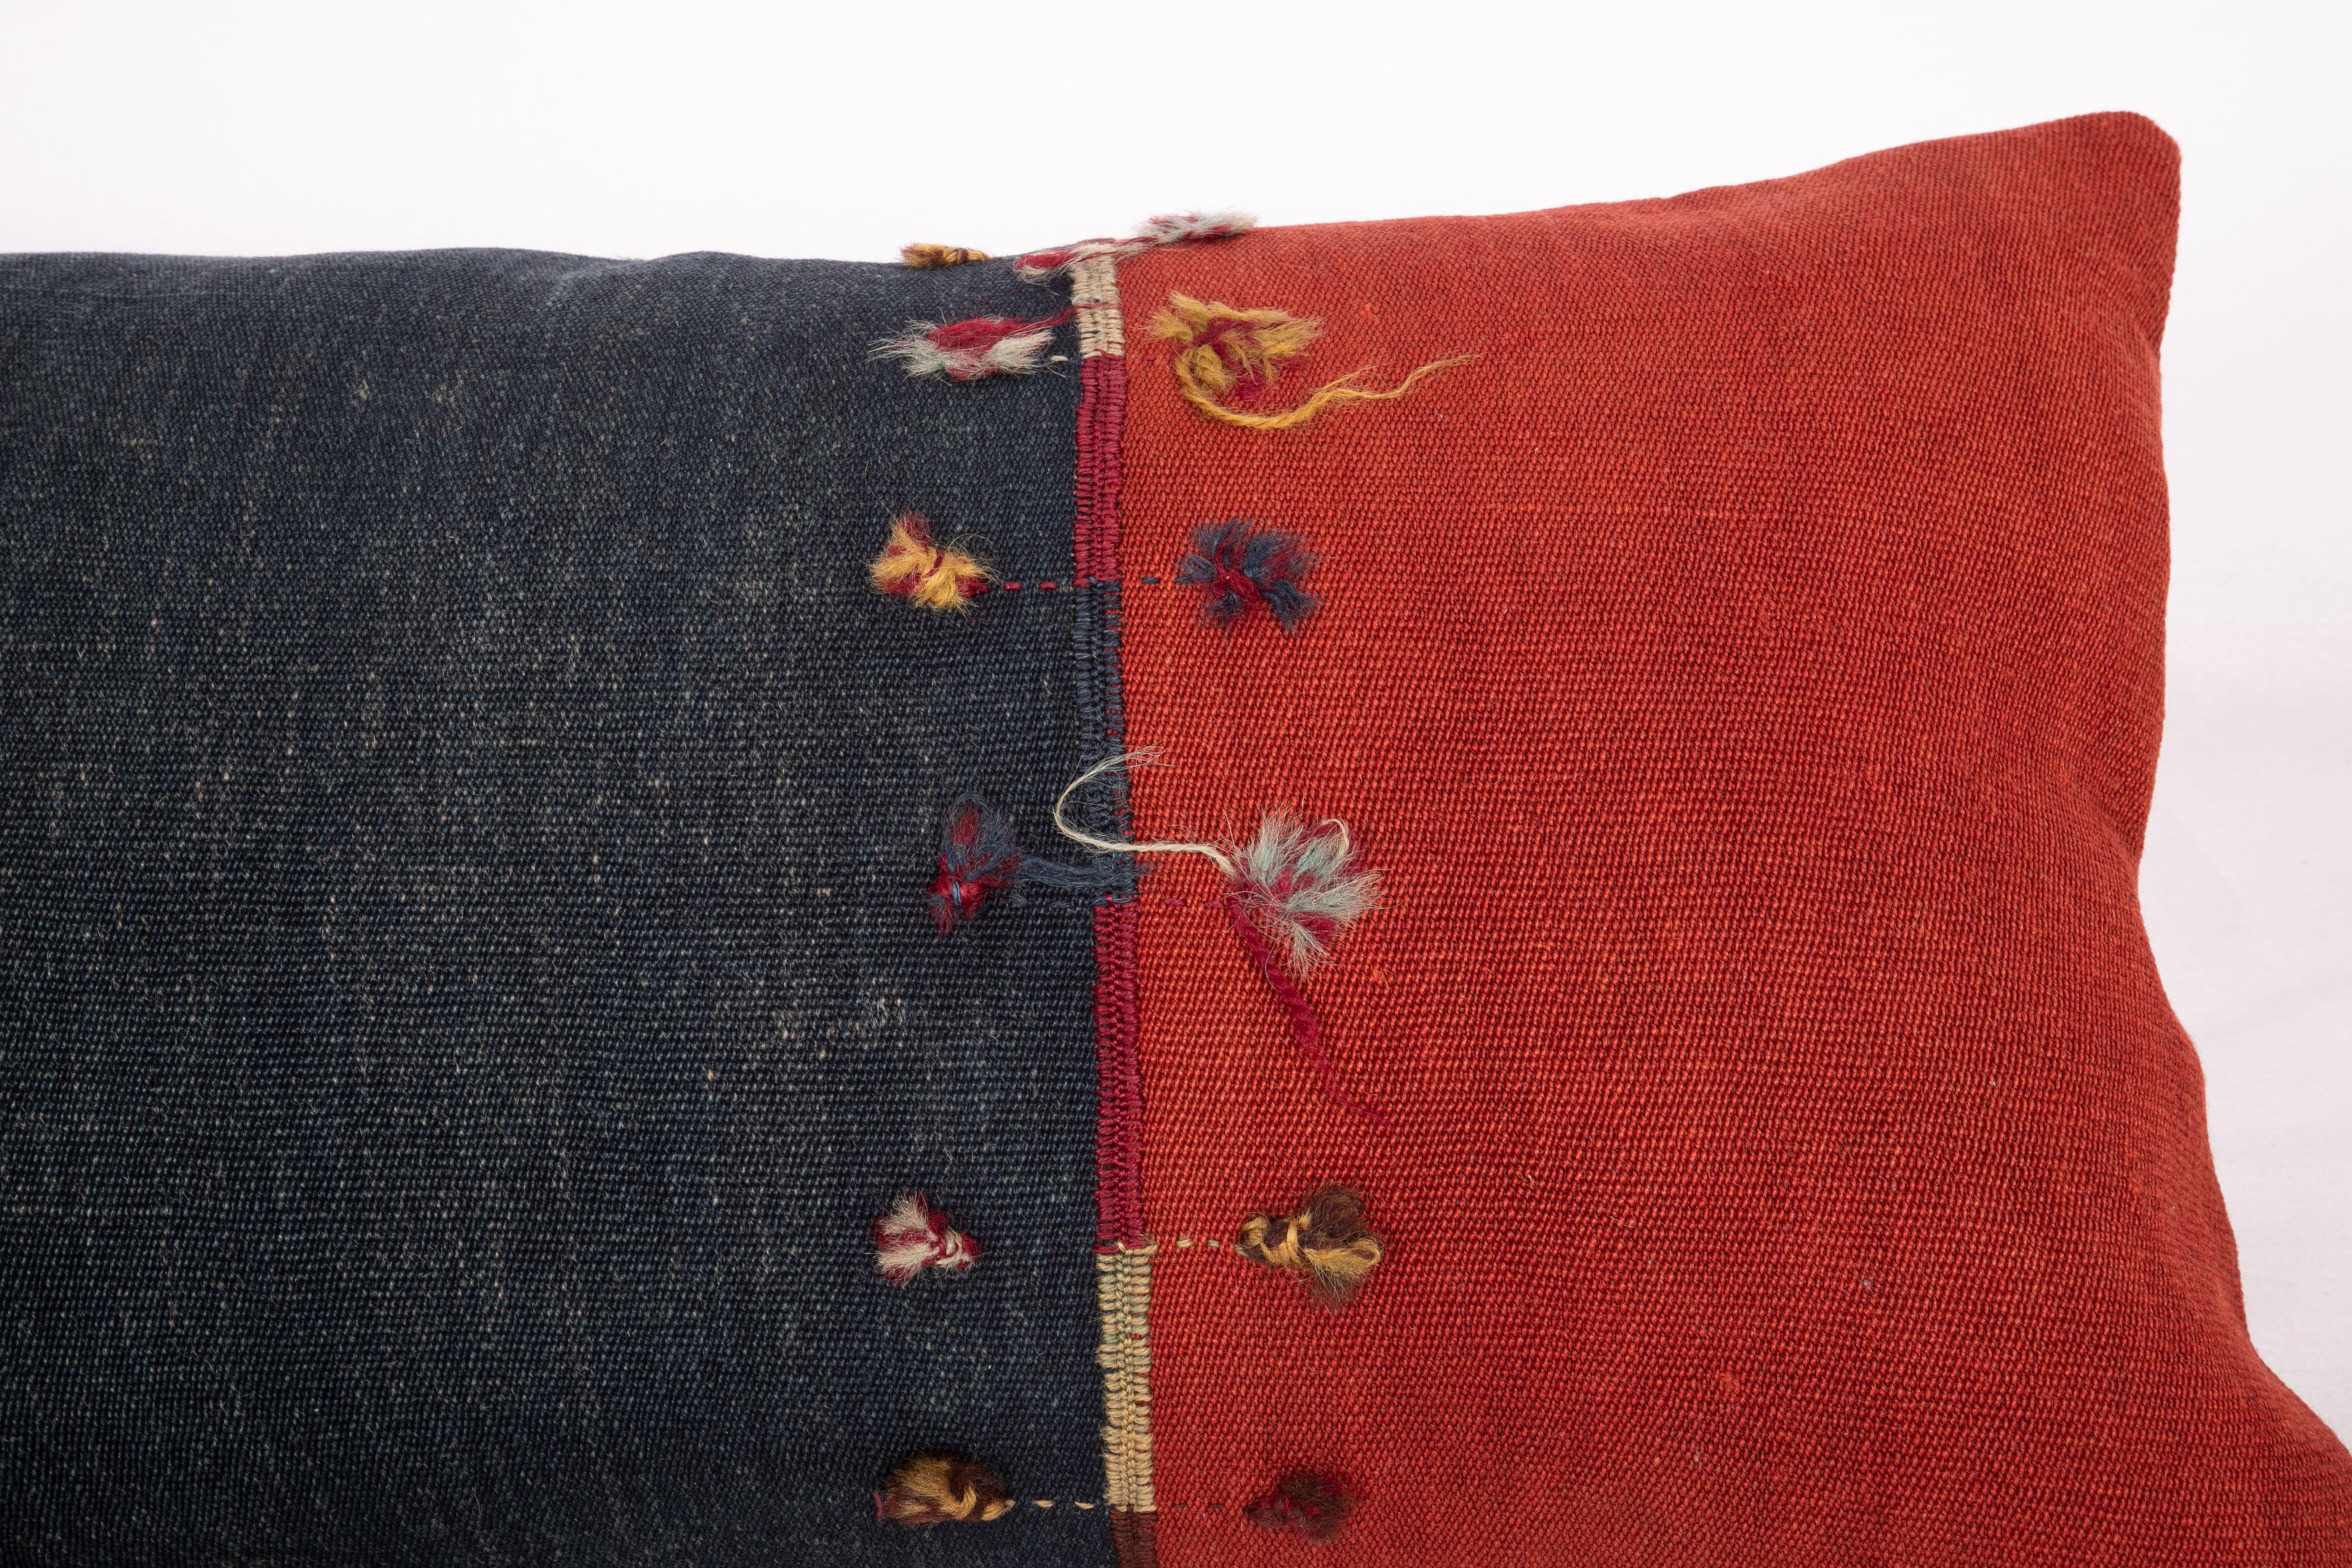 Hand-Woven Antique Lumbar Pillow Case Made from an Eastern Anatolian Cover, Late 19th C